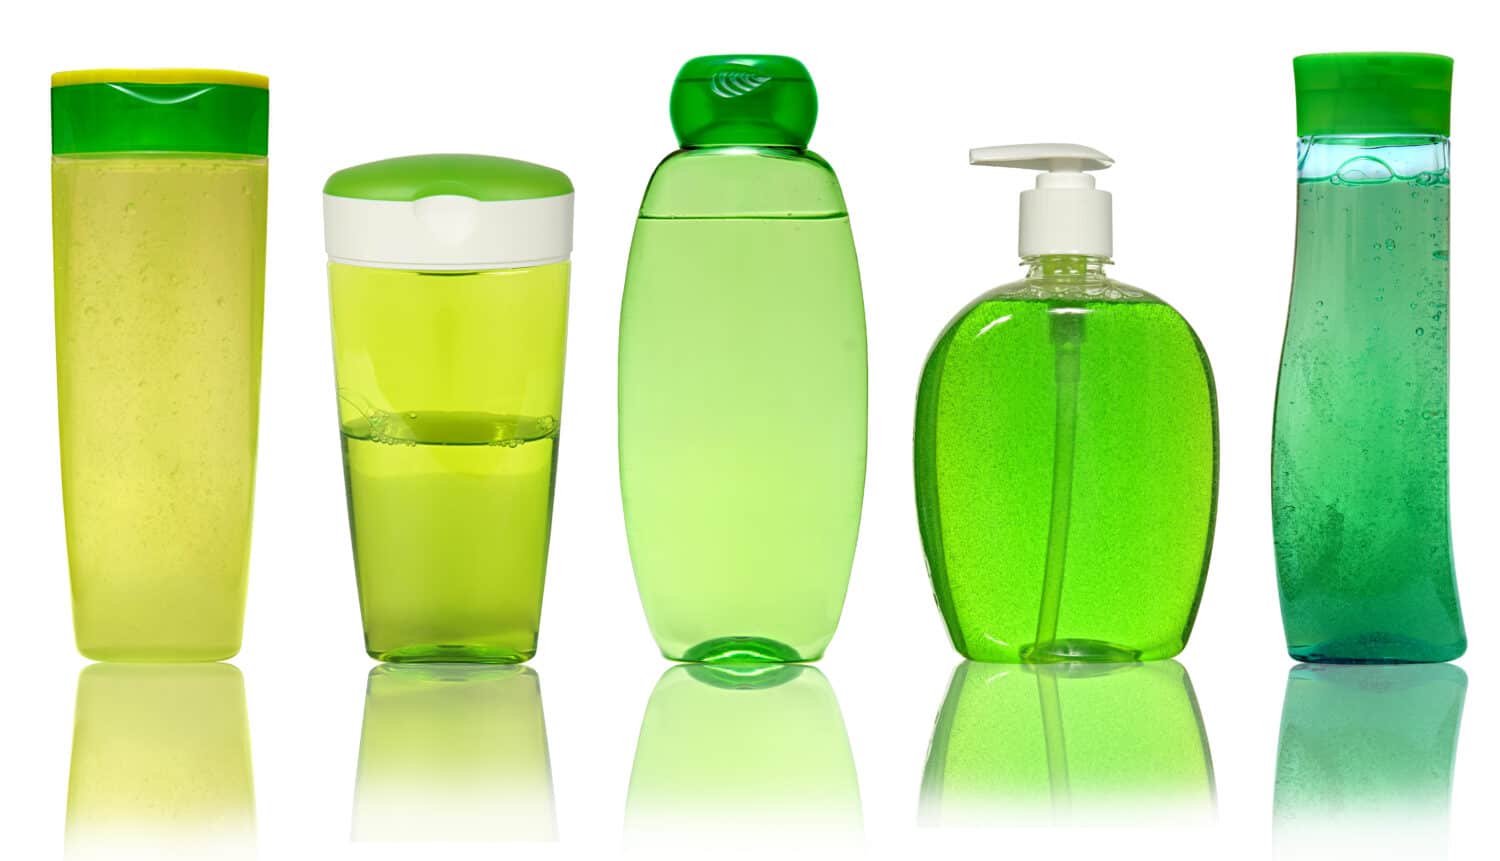 Five Green Plastic Bottles With Shampoo, Liquid Soap, Shower Gel. Isolated on white background with reflection.